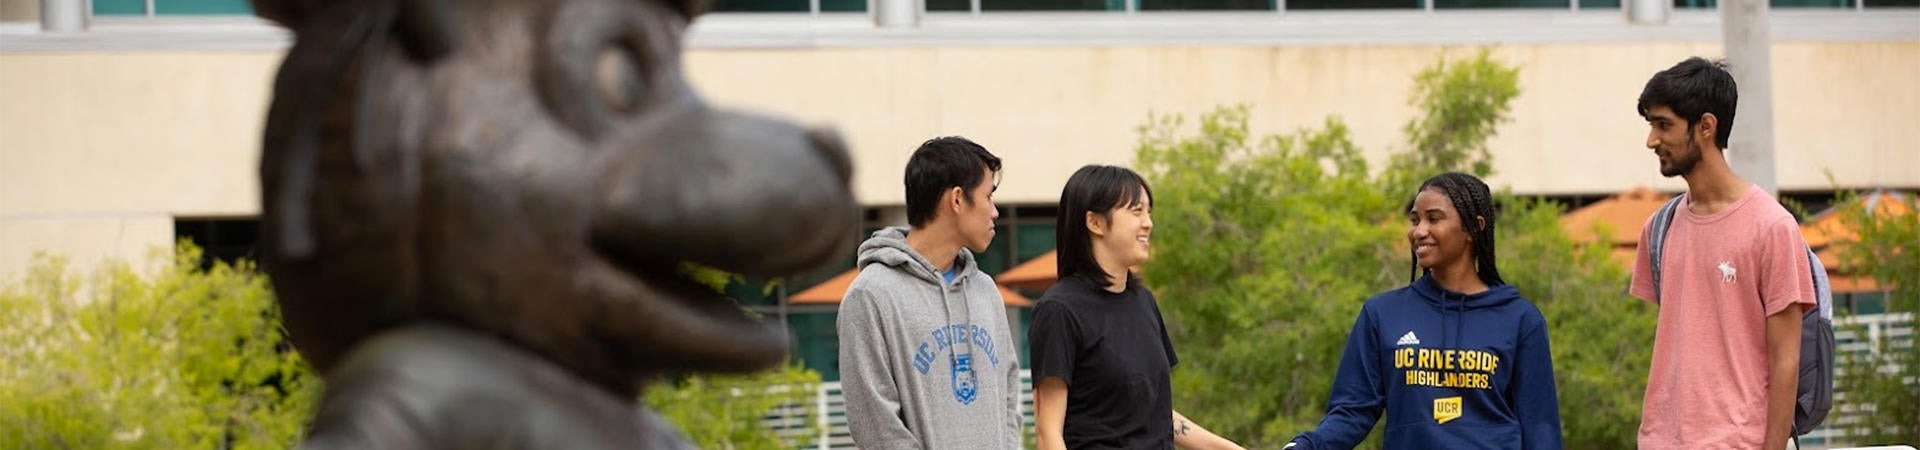 Students Wearing University Clothing from the UCR Bookstore